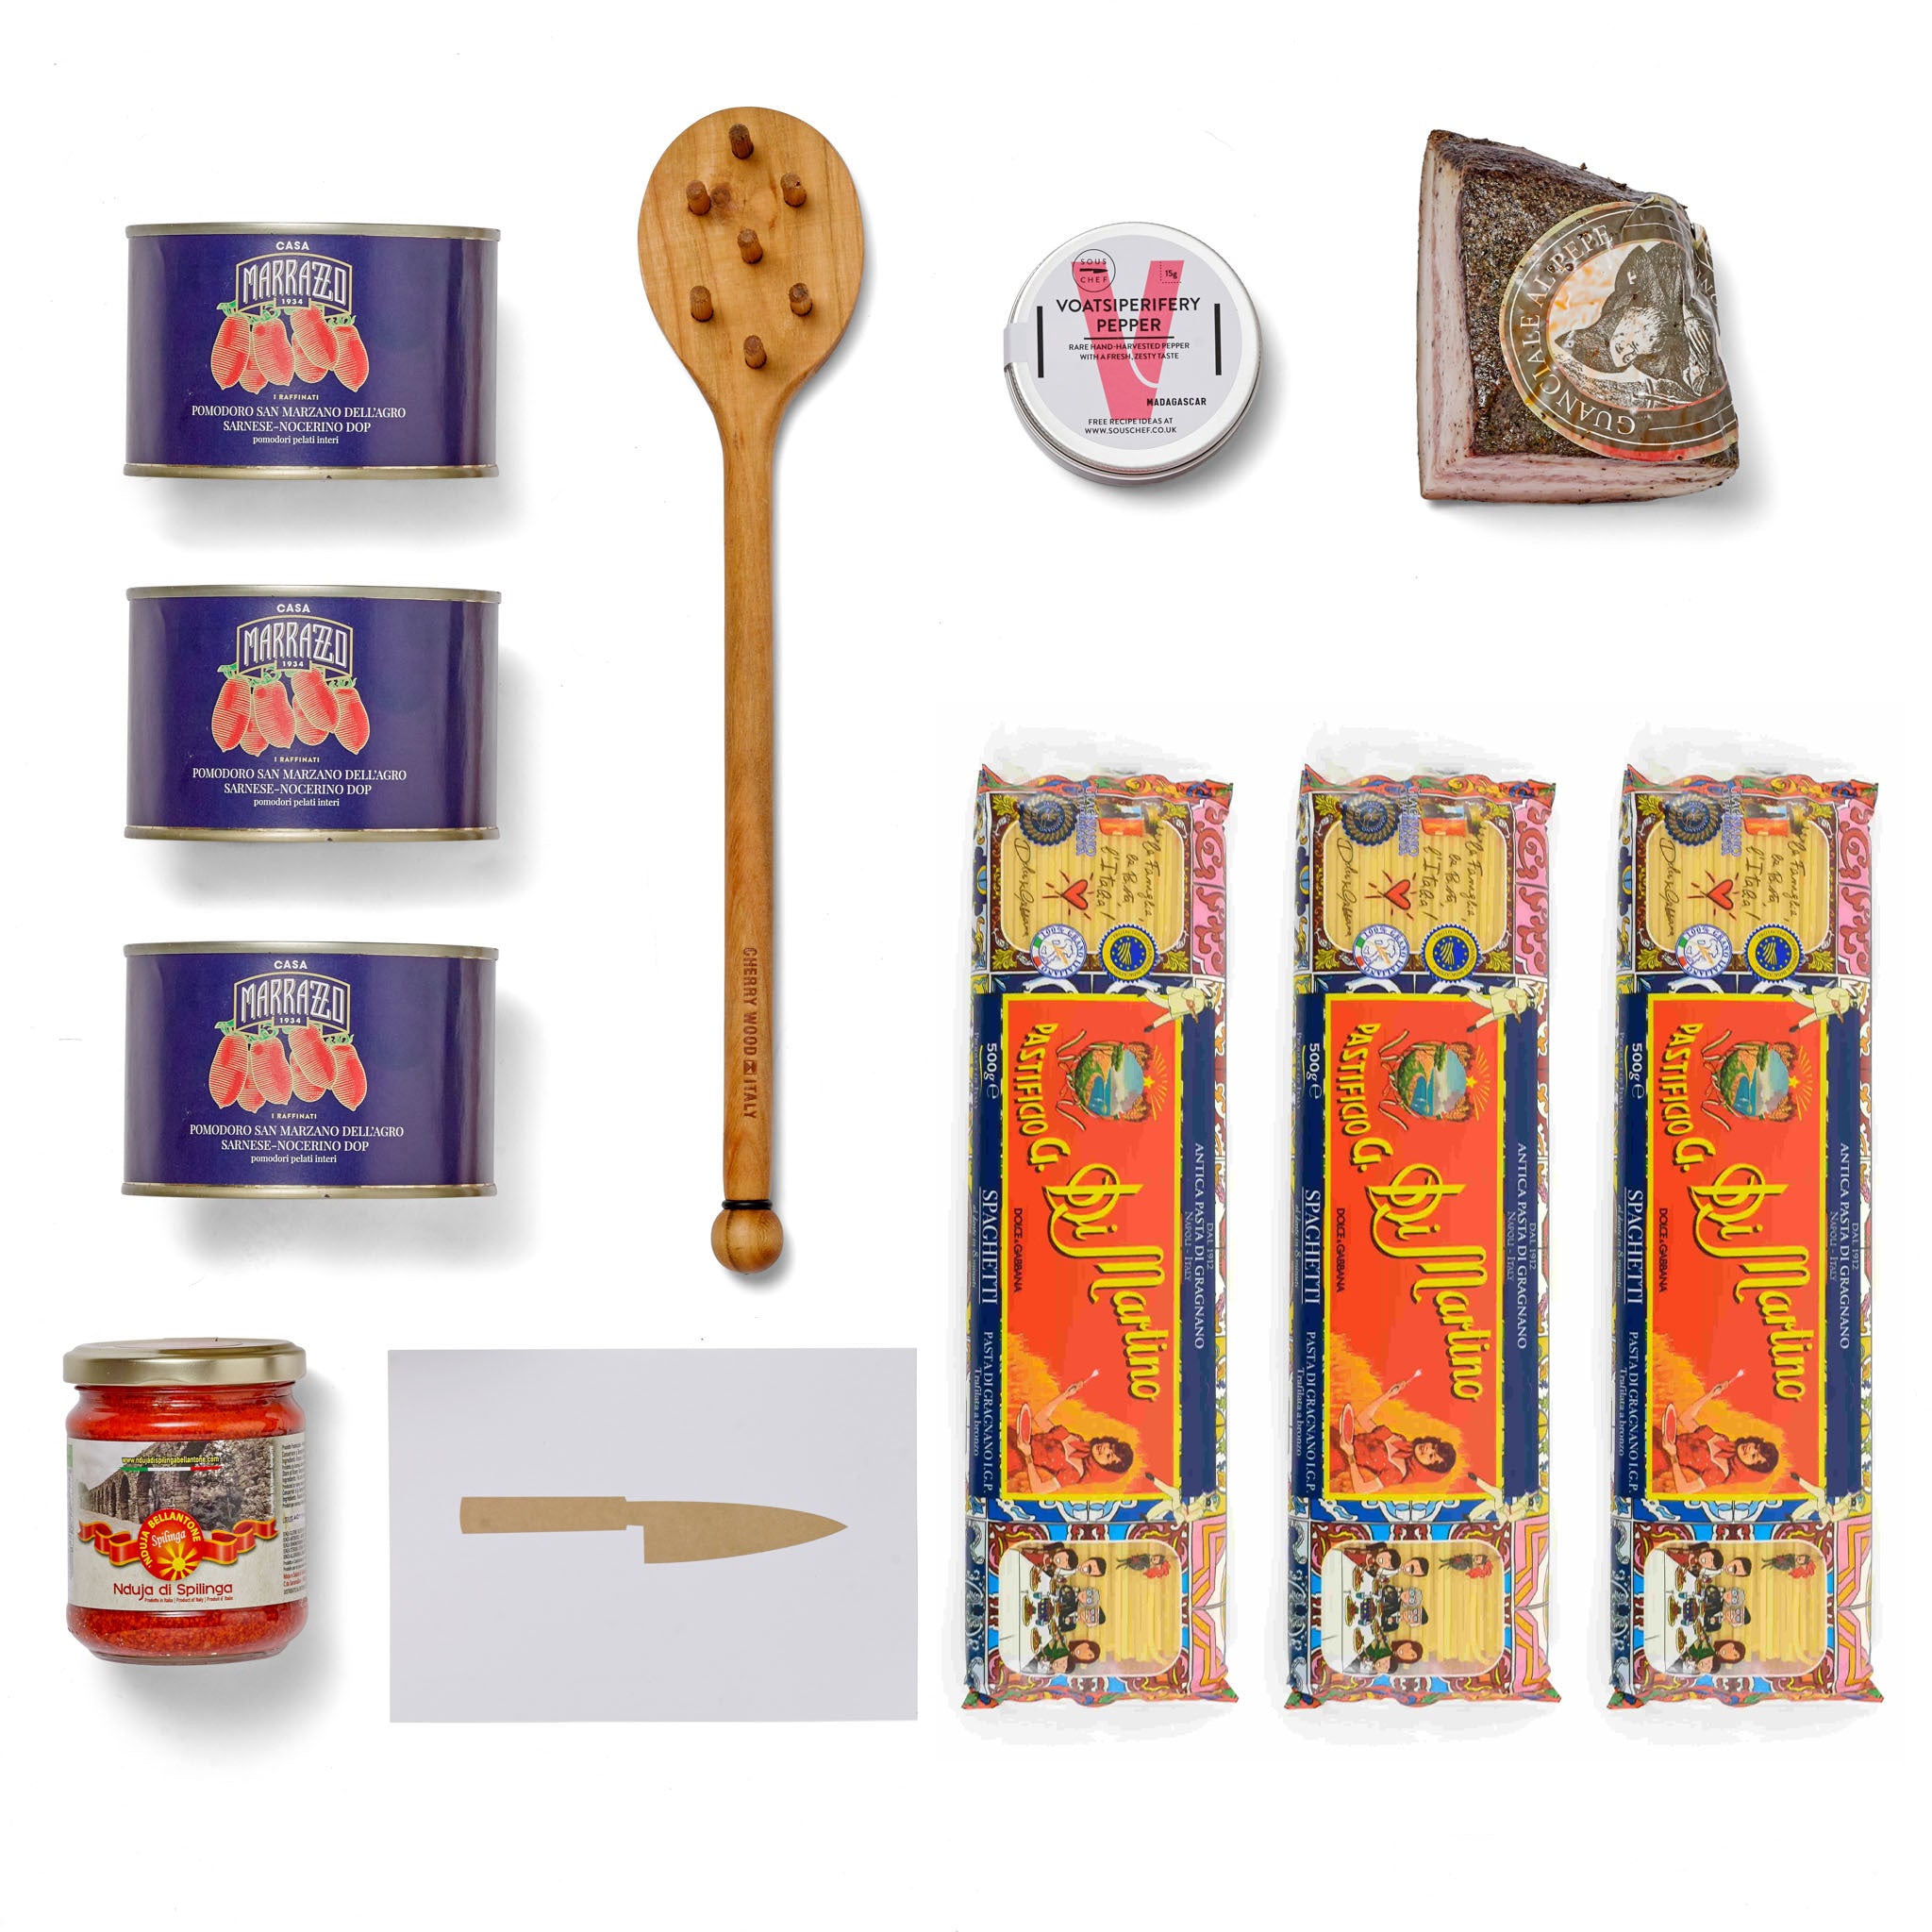 The "Don't Look Down on Pasta" Kit